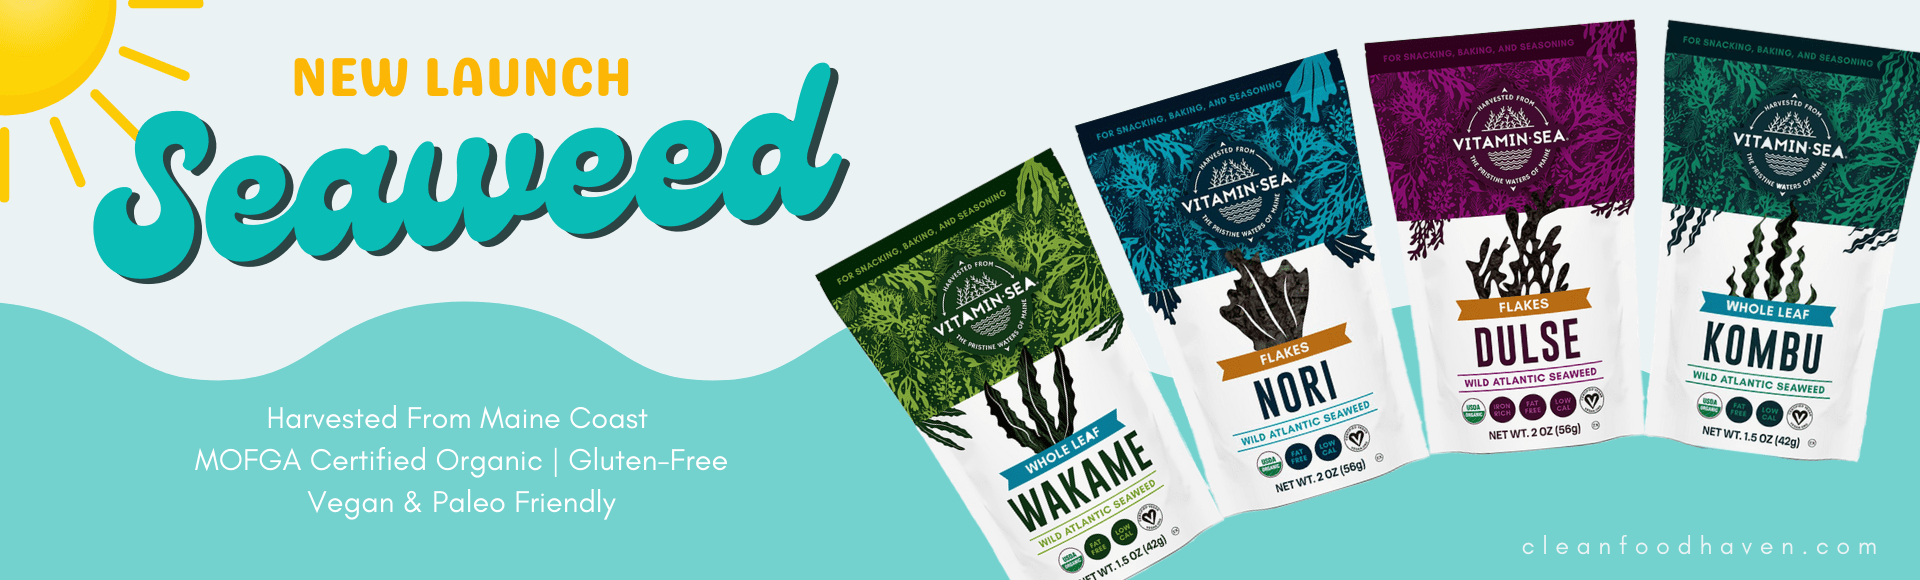 Clean Food Haven New Launch Seaweed